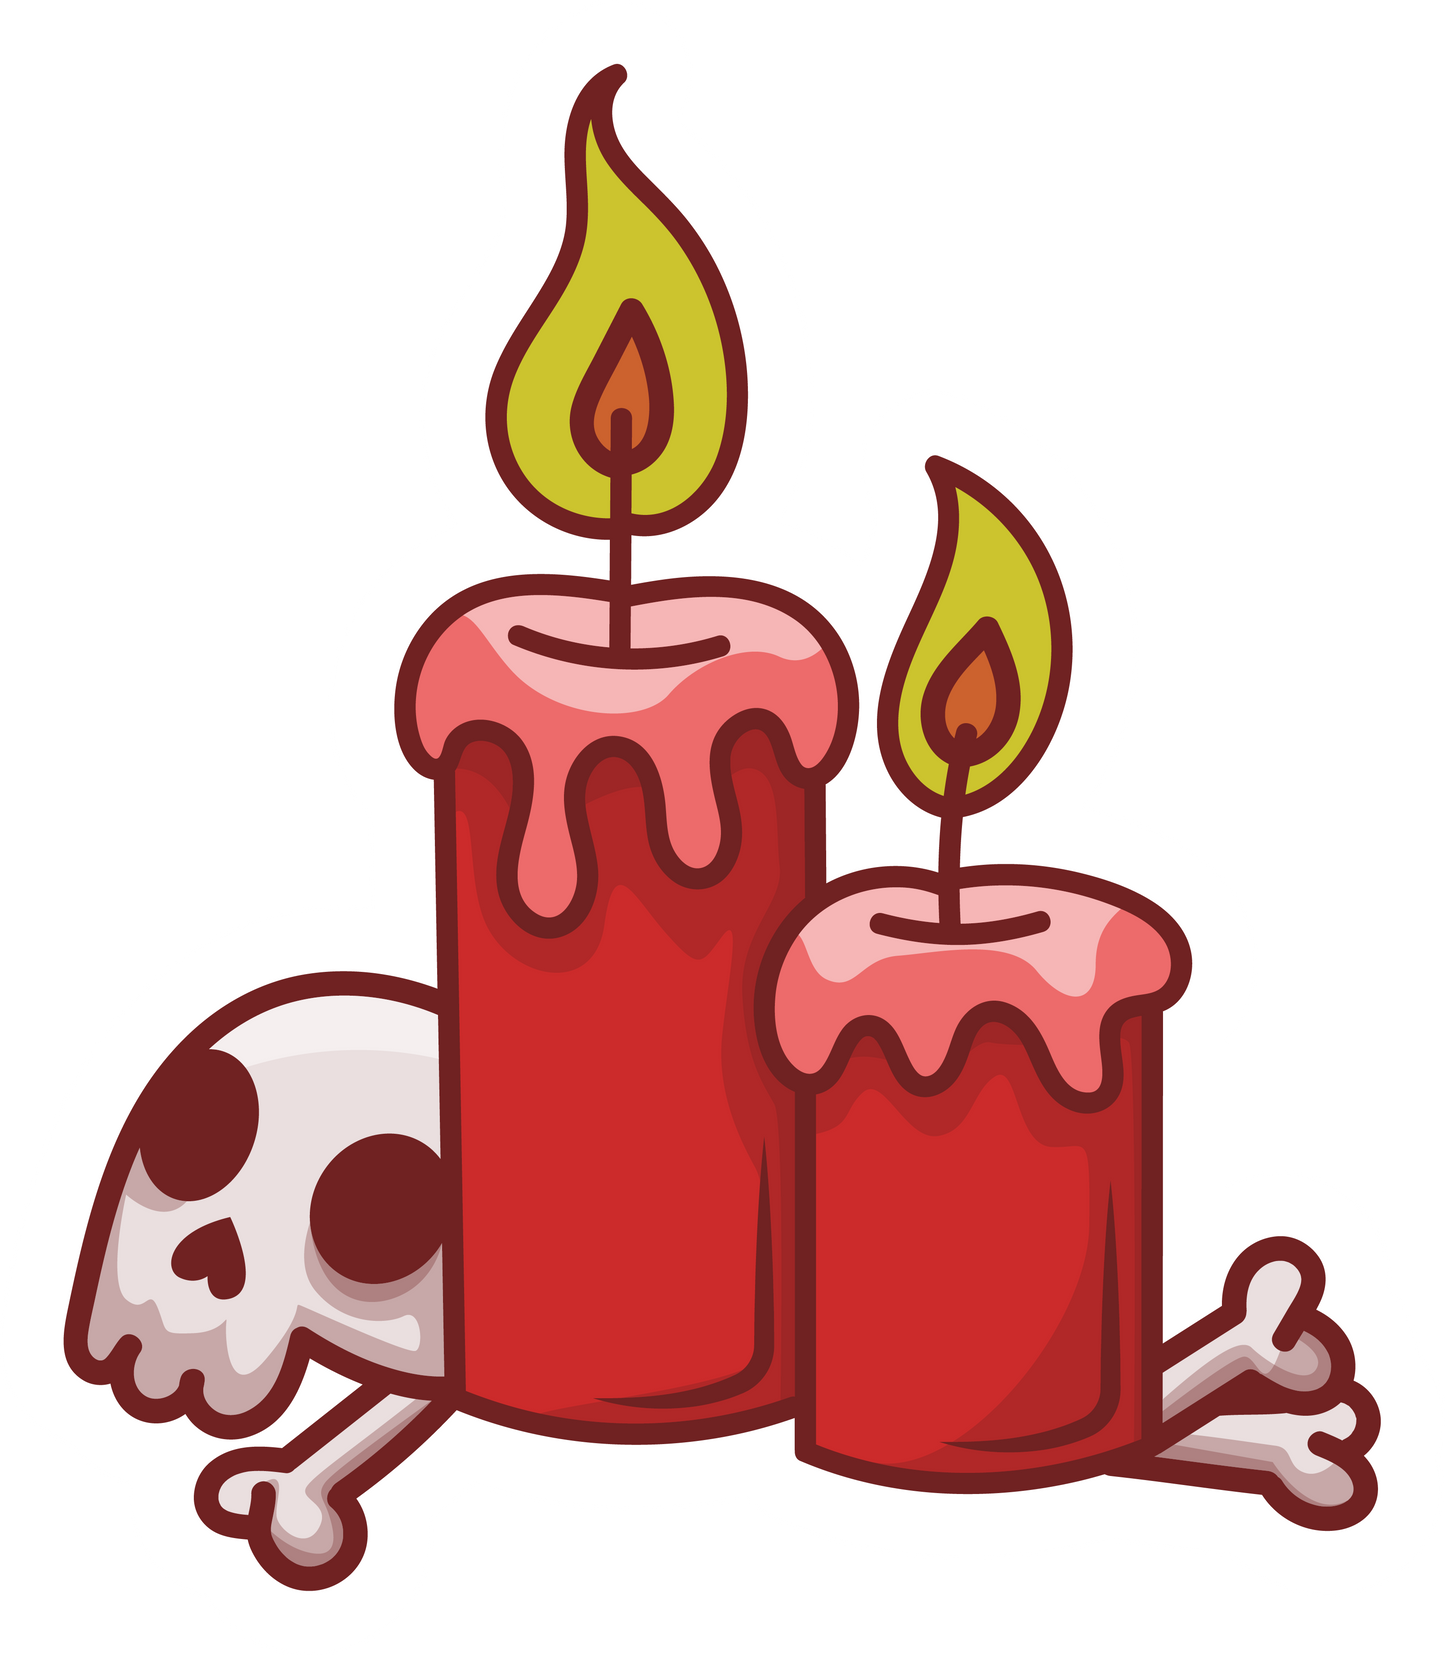 Stickers - Christmas Candles and Skull Sticker, Christmas Stickers